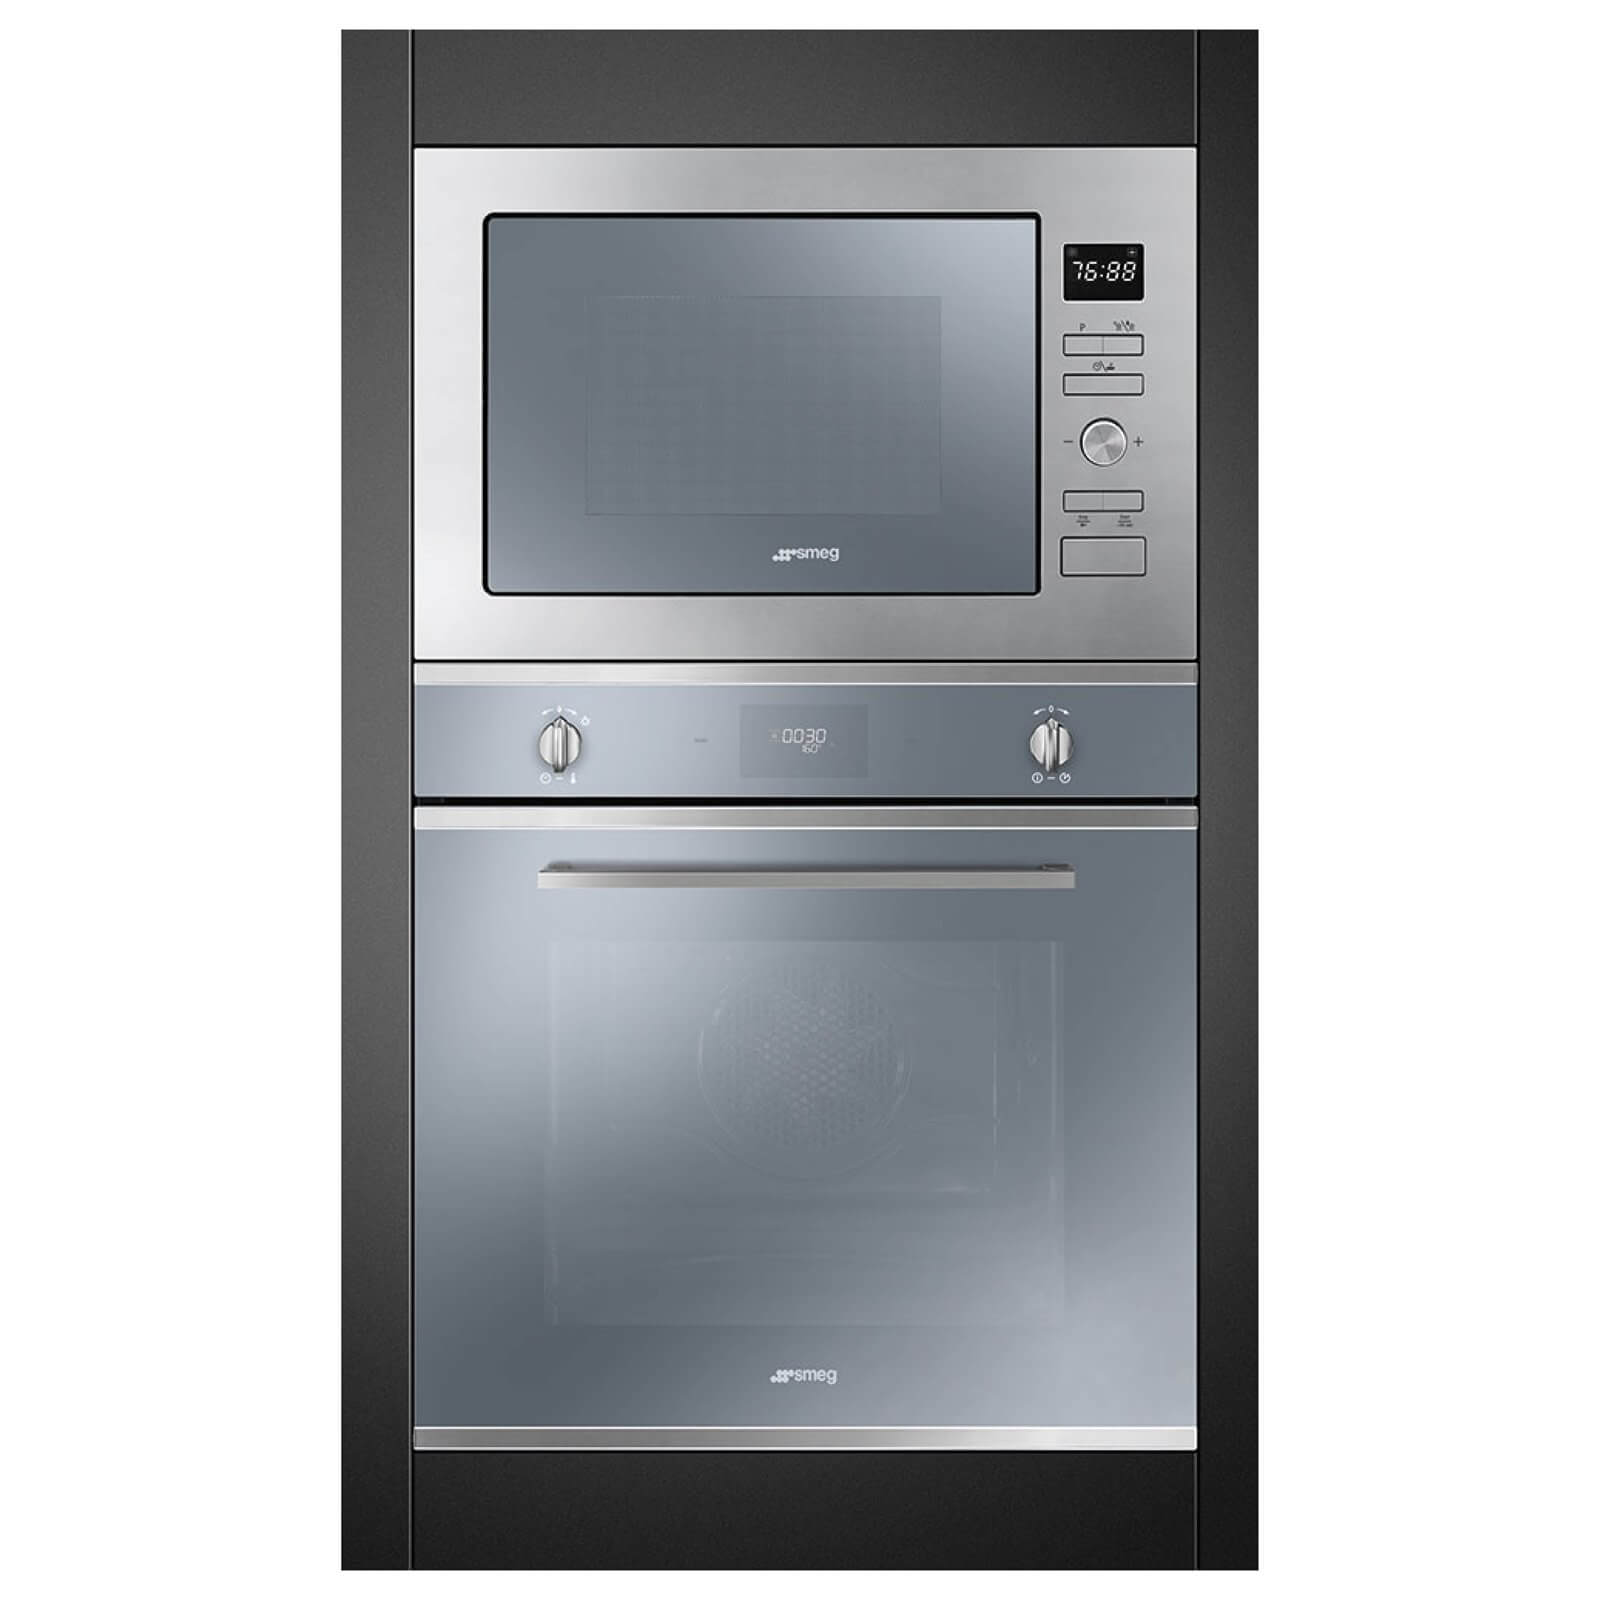 Smeg FMI425S Cucina Silver Glass Built-in Microwave Oven with Grill complete with Frame - 25 litres